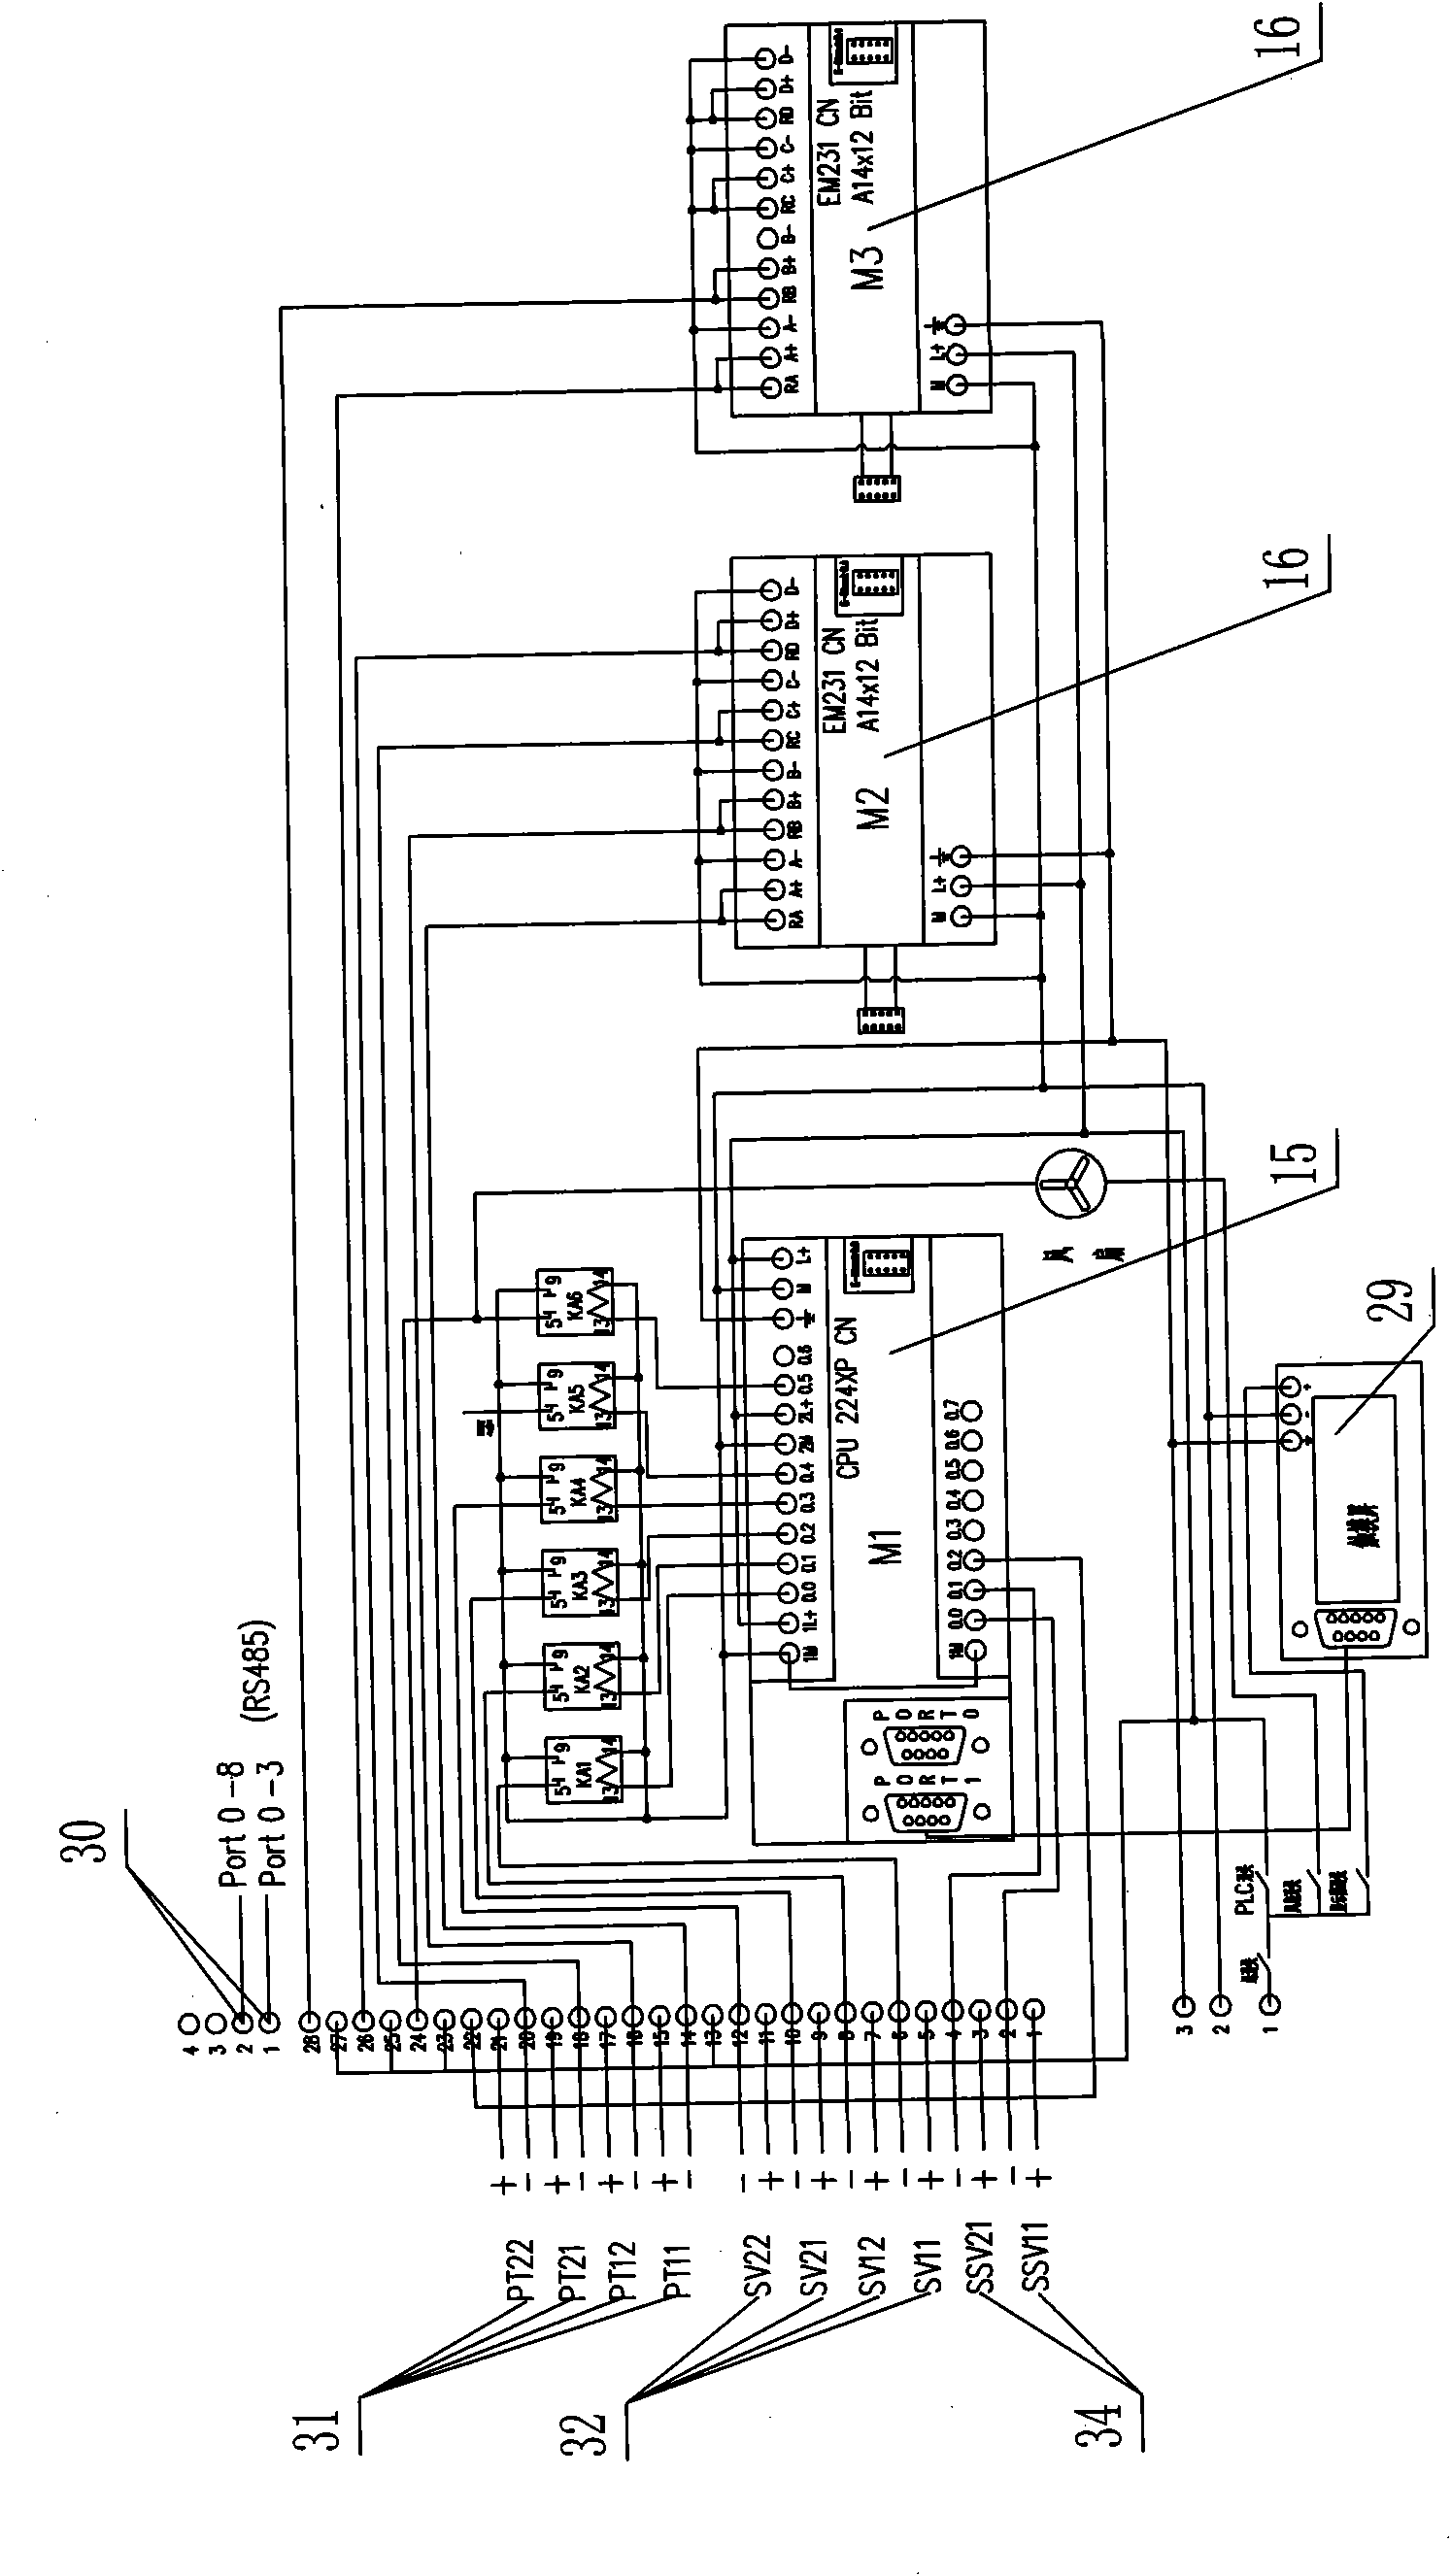 Remote pressure and flow control system of self-operated regulator